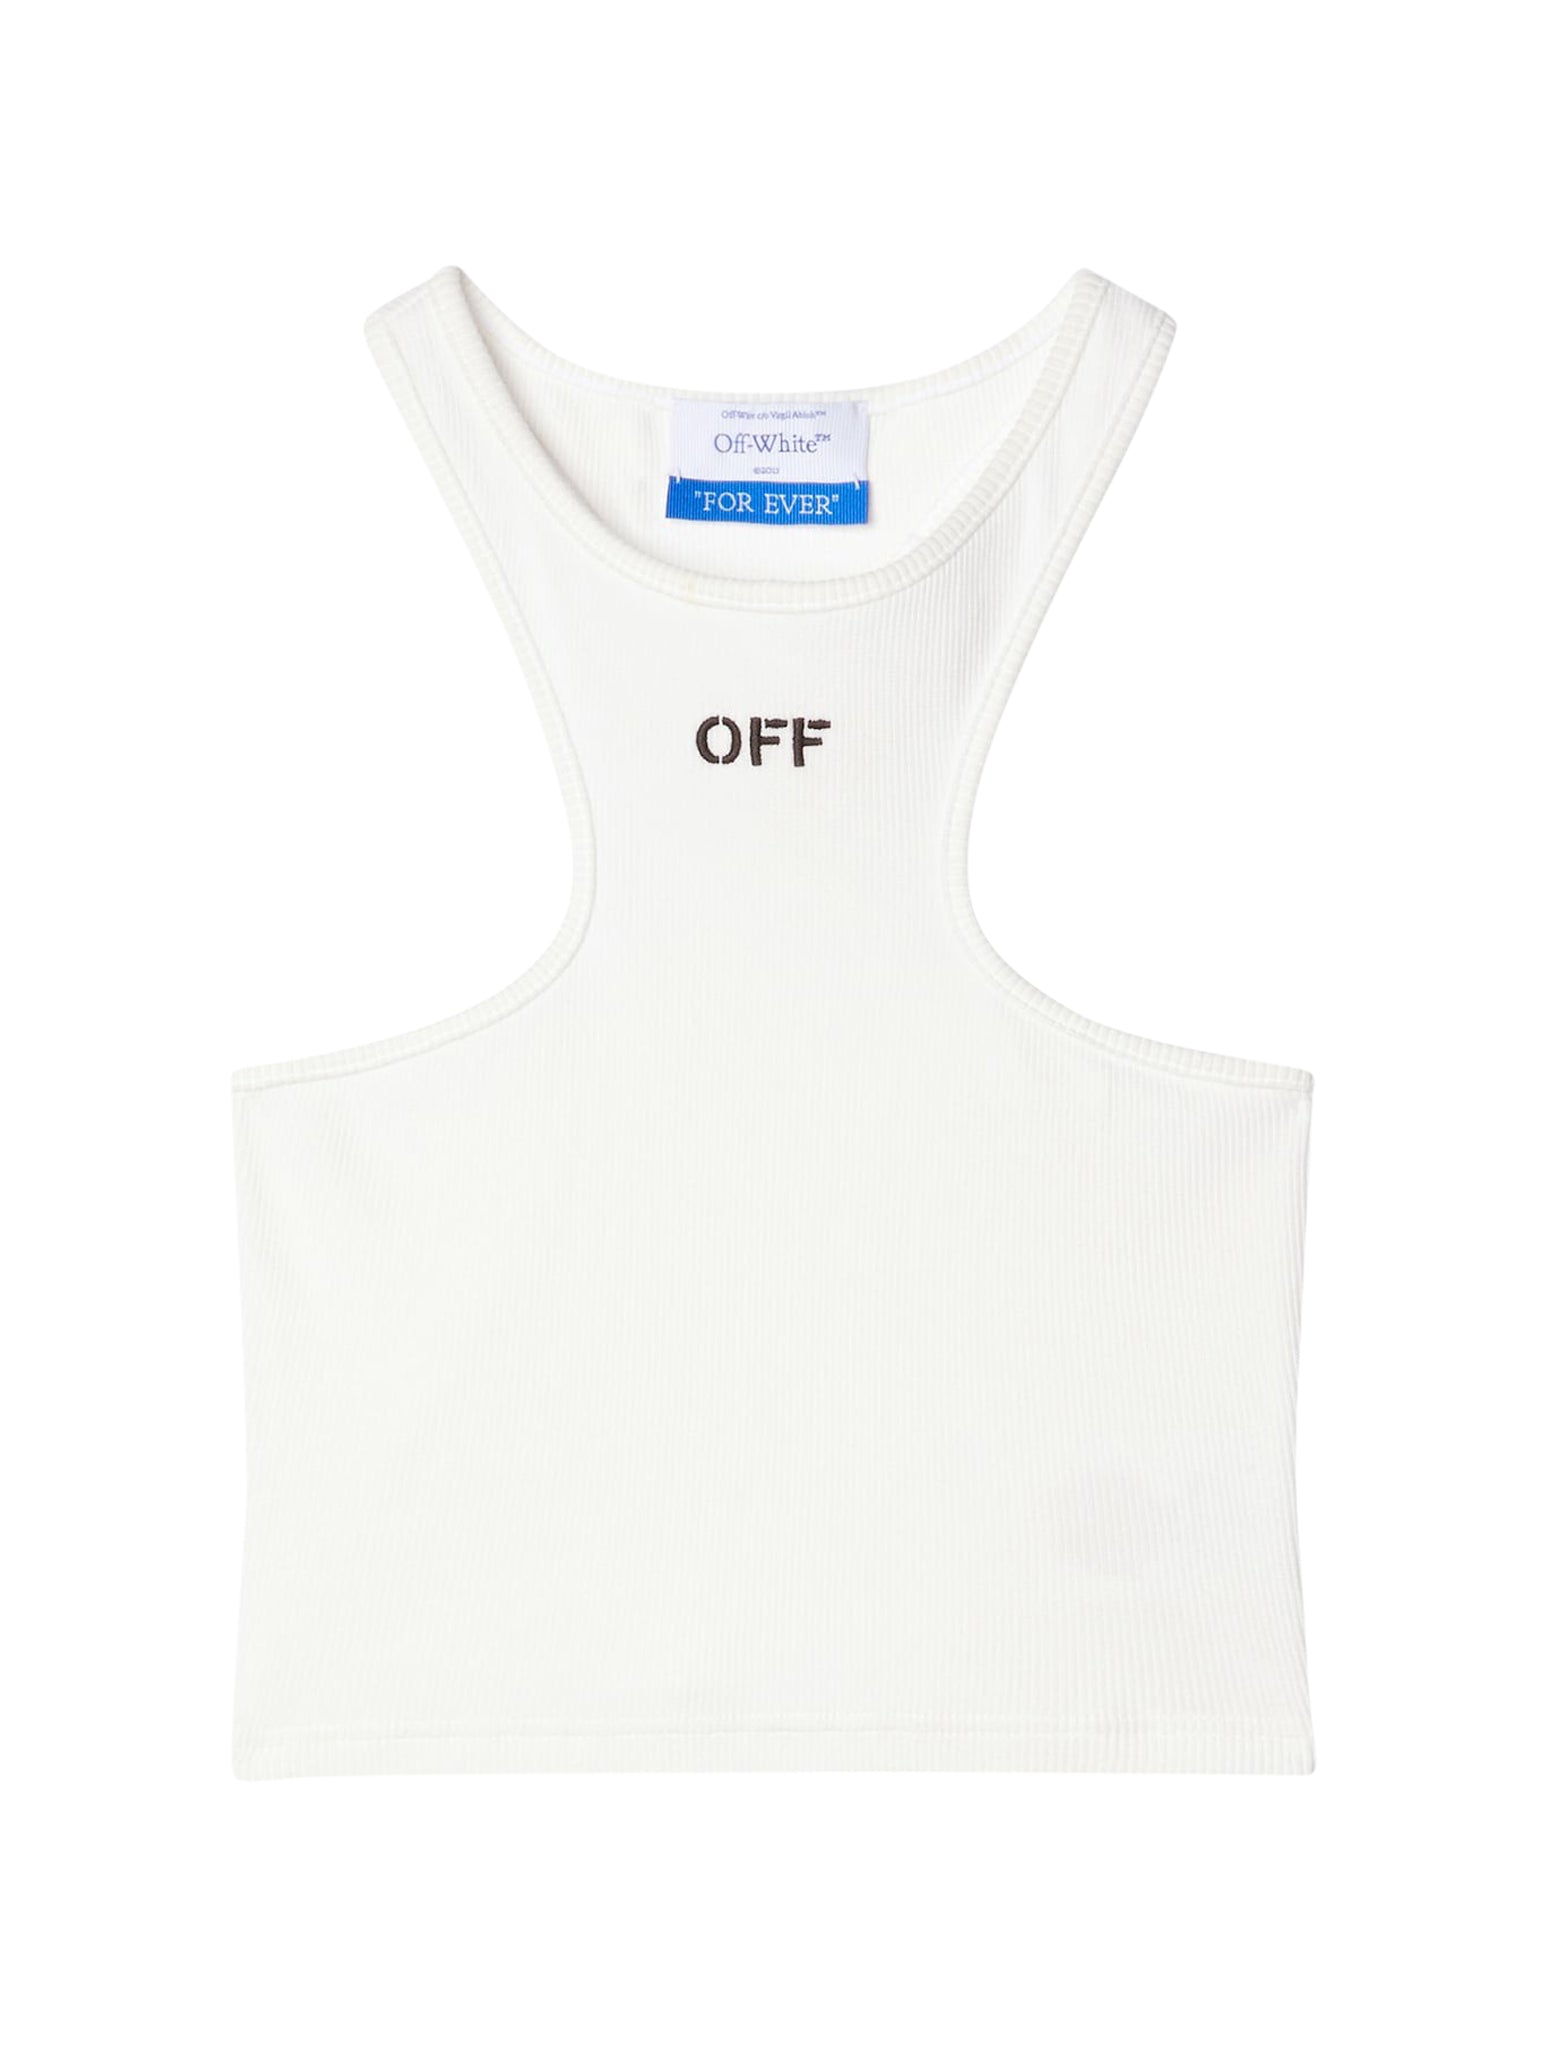 OFF STAMP RIB ROWING TOP